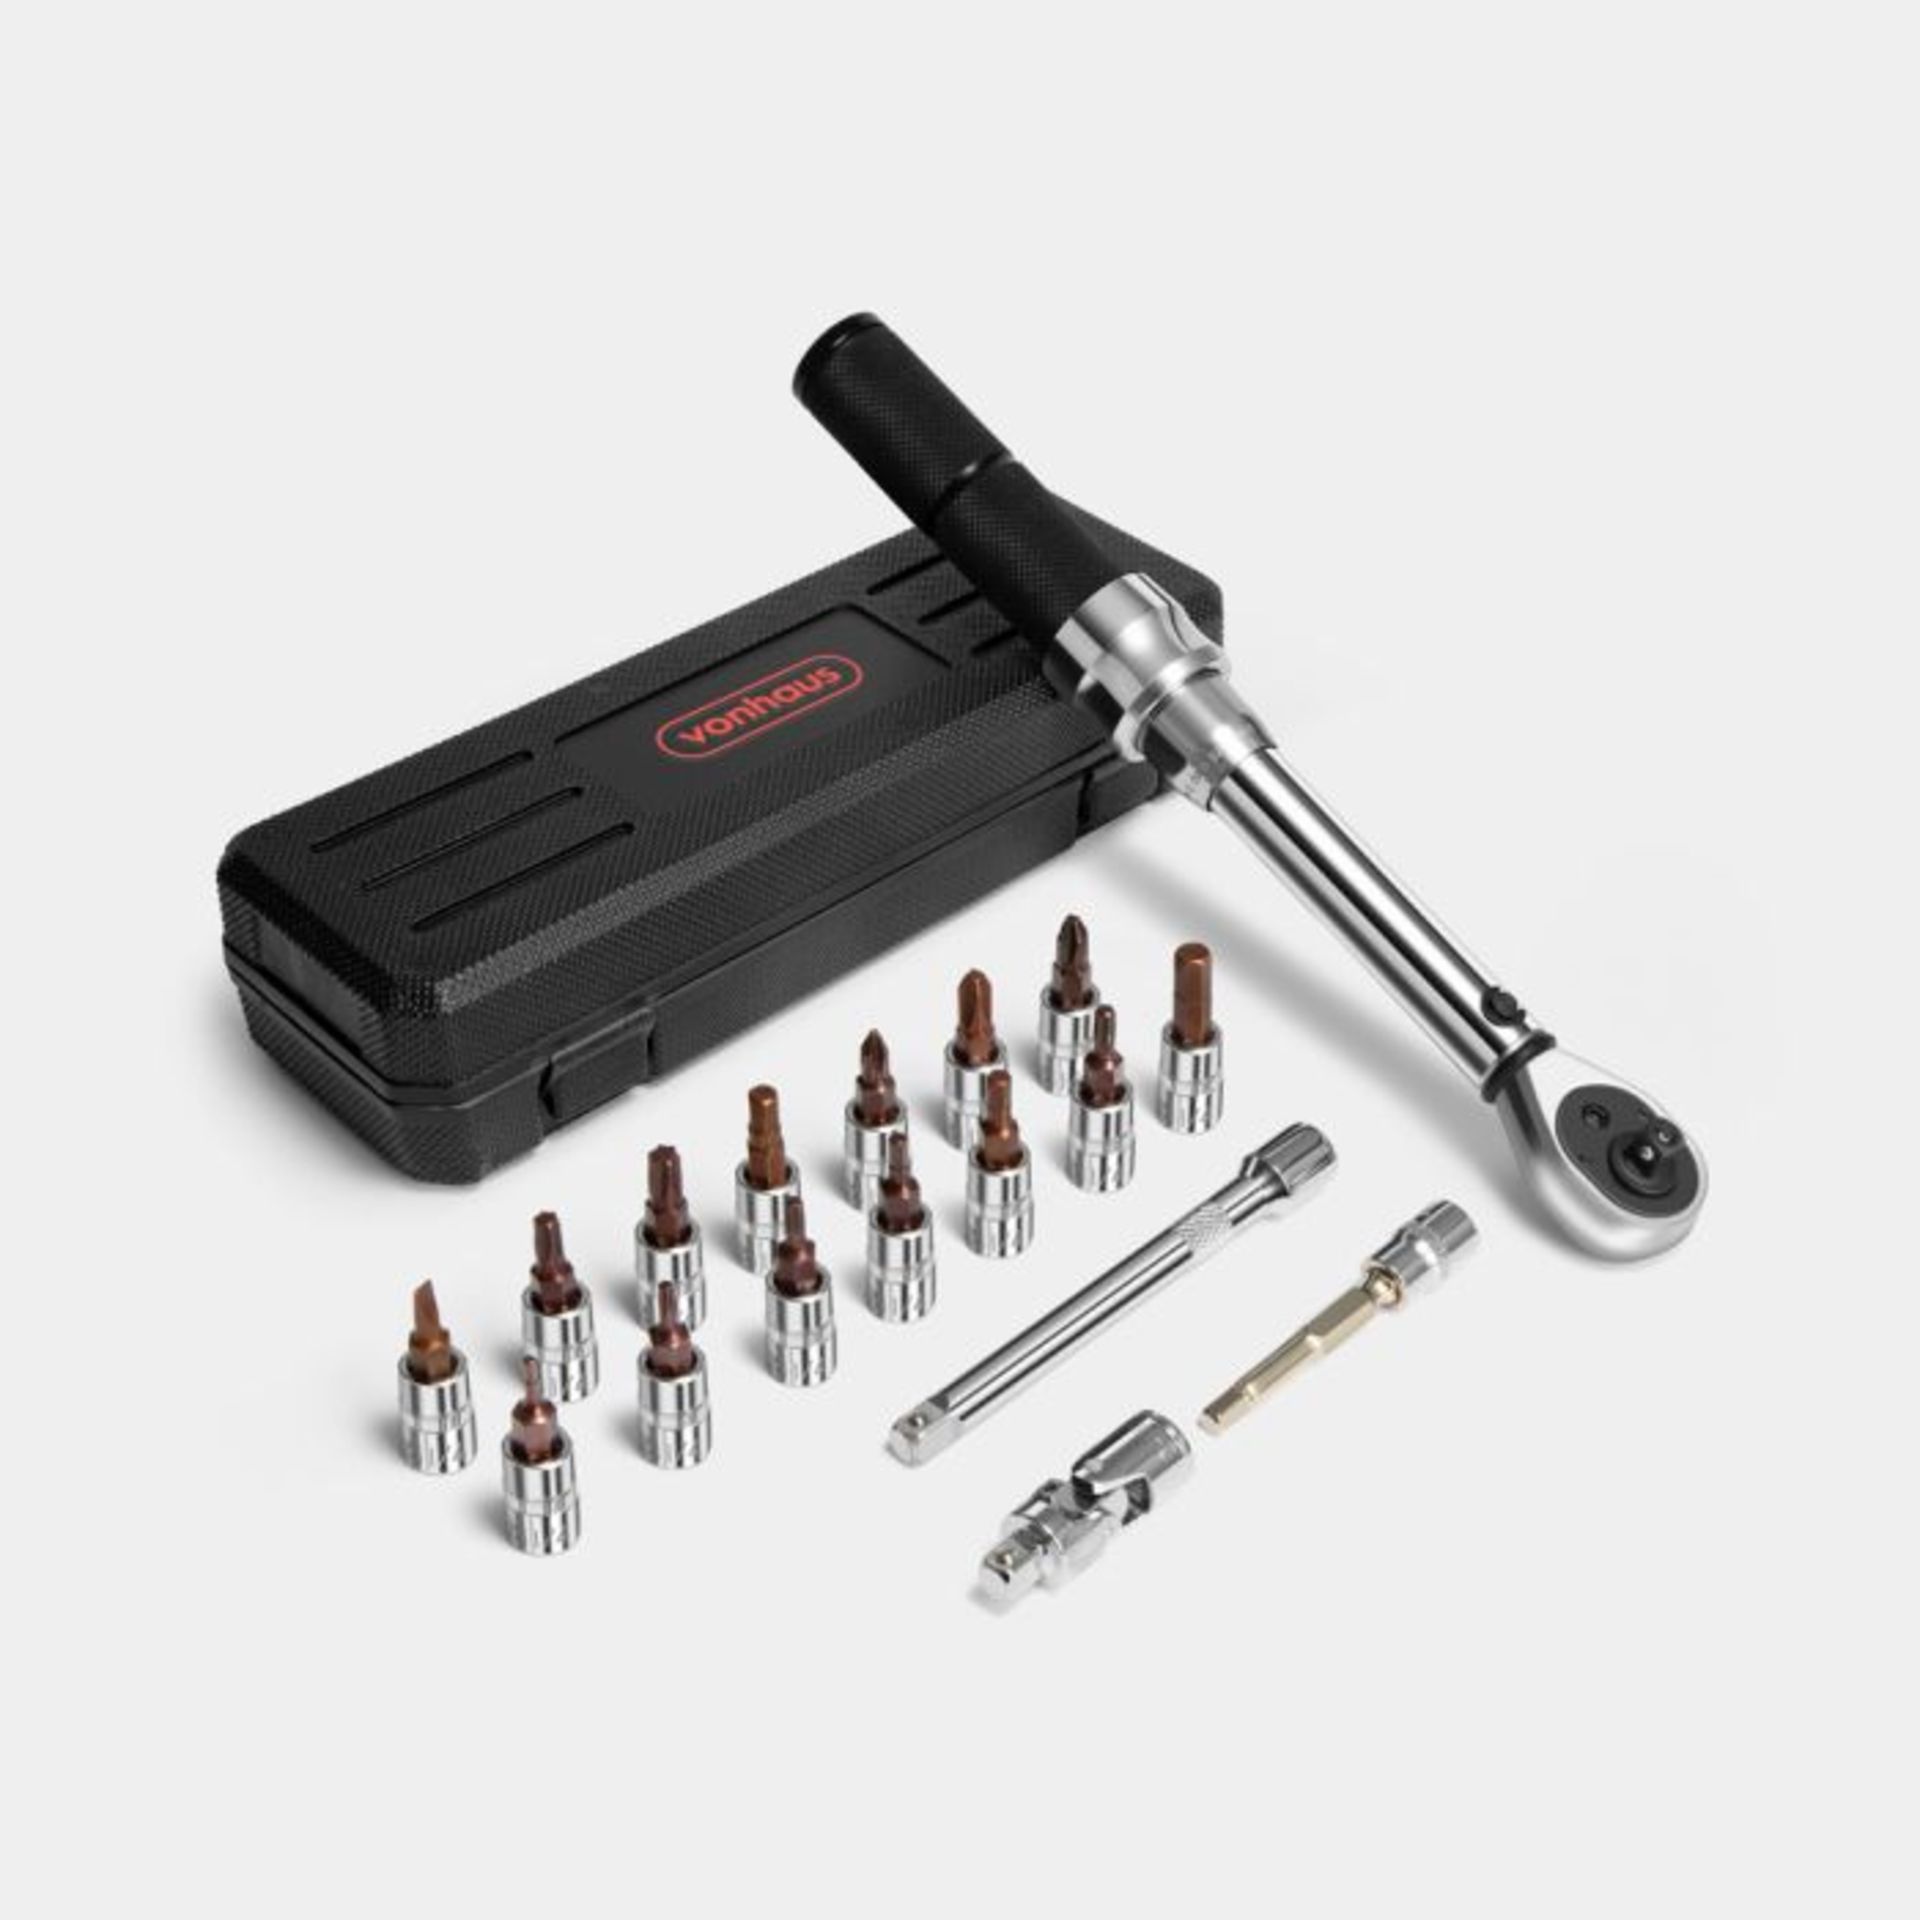 19Pc Bike Torque Wrench Kit. - ER52. Tighten up your bike and keep it in great condition for